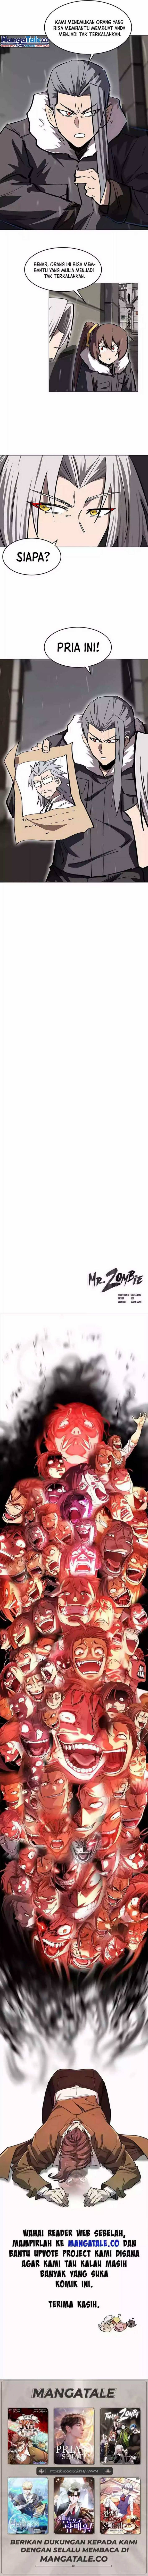 Mr. Zombie Chapter 39 Image 8